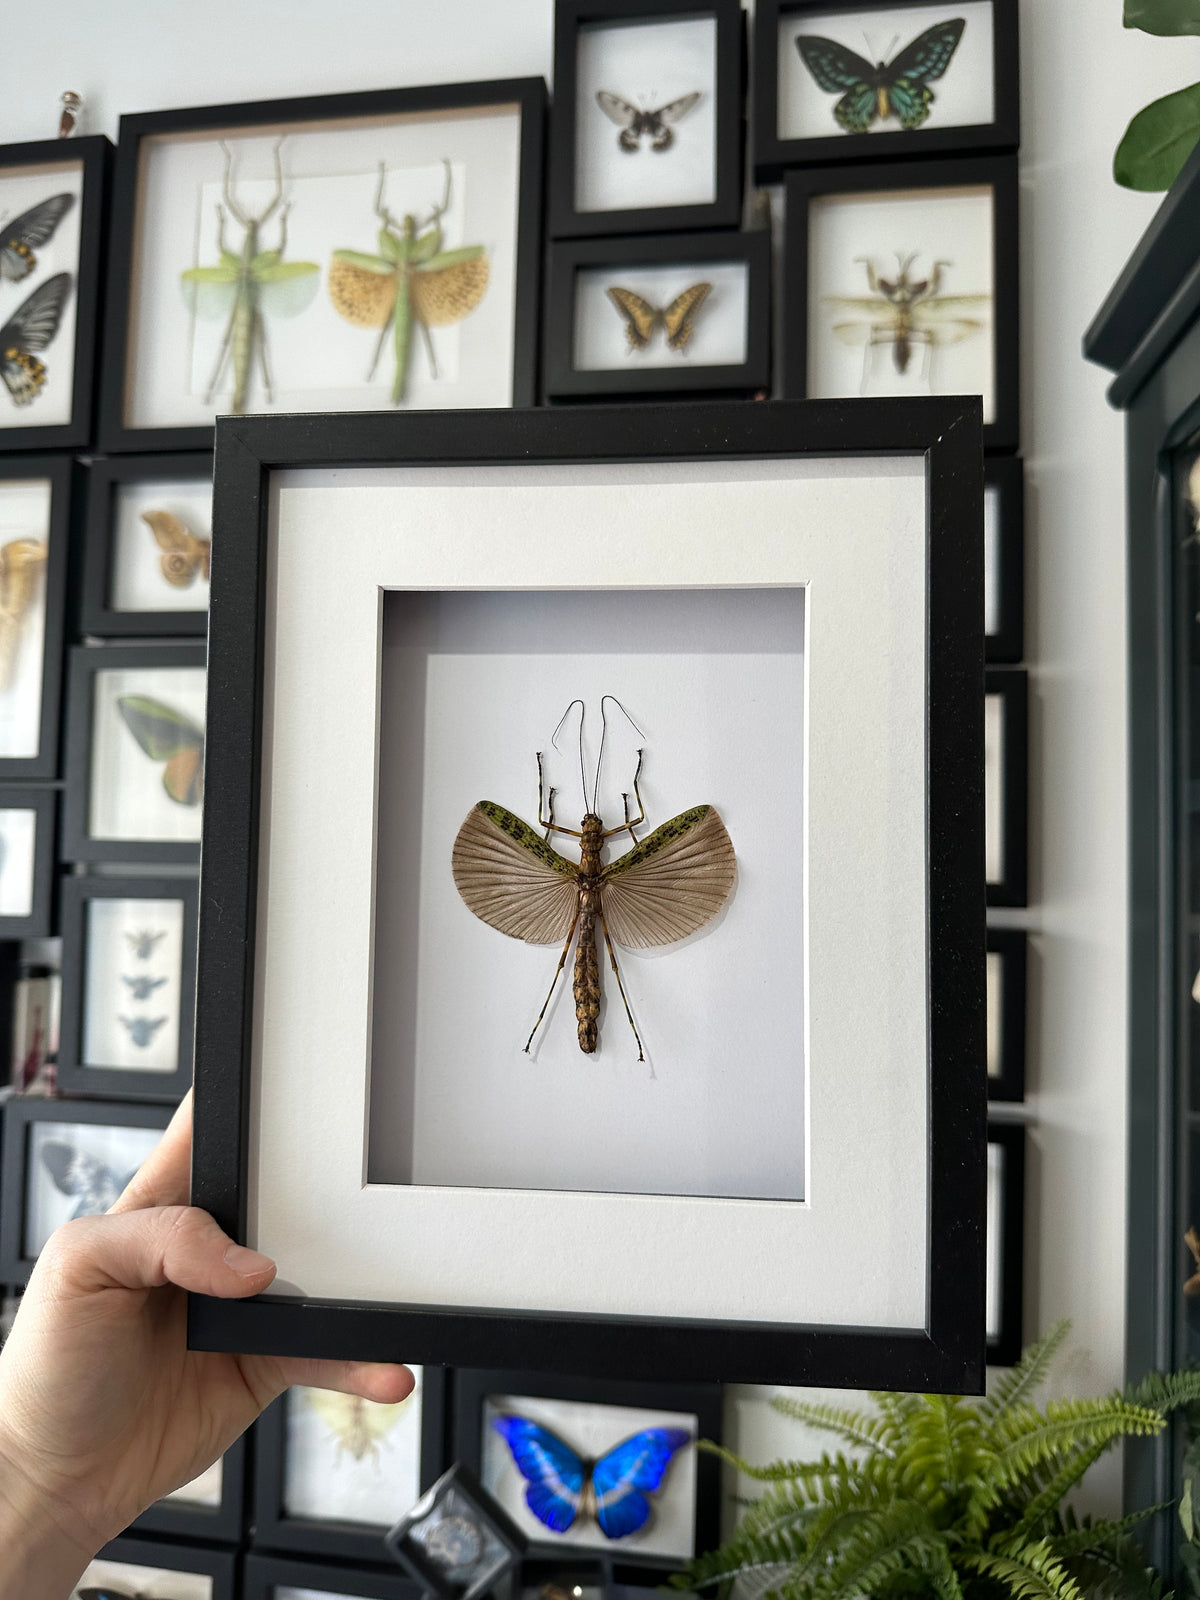 Stick Insect sp. in a frame